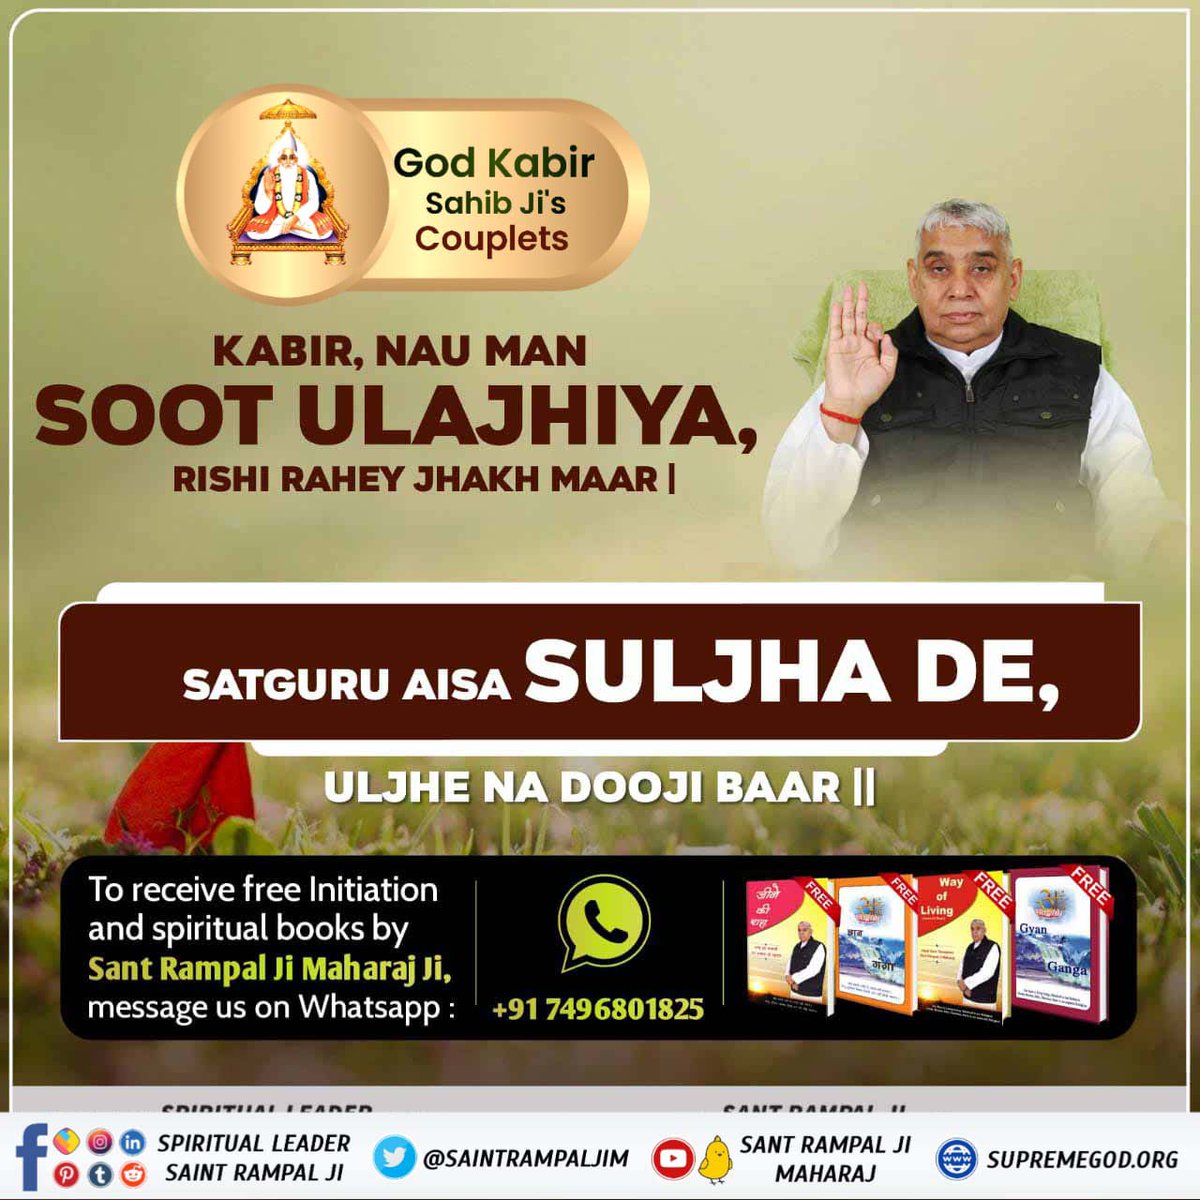 #परमात्माकबीरकी_वाणी_एकमंत्र के समान है He said that a leaf cannot be the same after it is separated from the branch. Similarly, once one dies, it is not possible to get human life again without passing through the cycles of death and birth. #GodMornimgTuesday